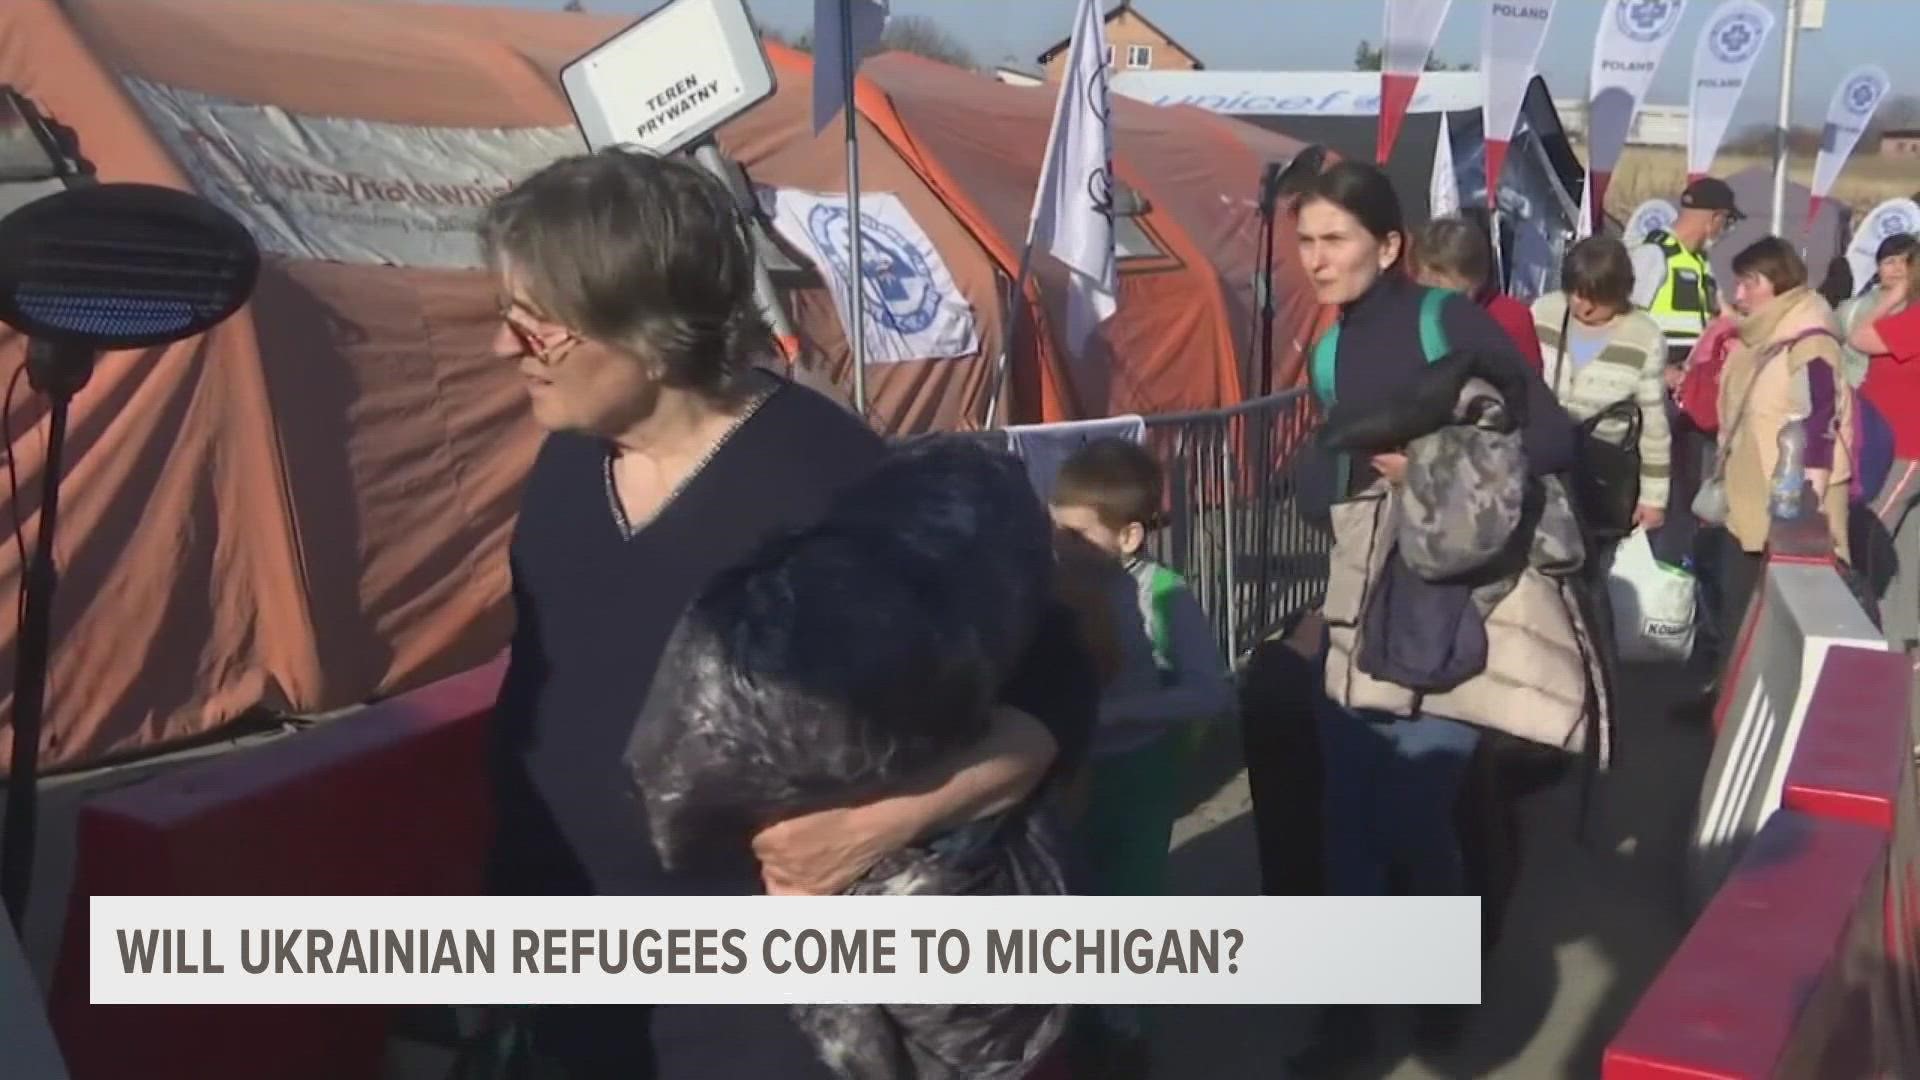 There still isn't numbers as to how many Ukrainian refugees will or could come to Michigan, but organizations are preparing to accept them.